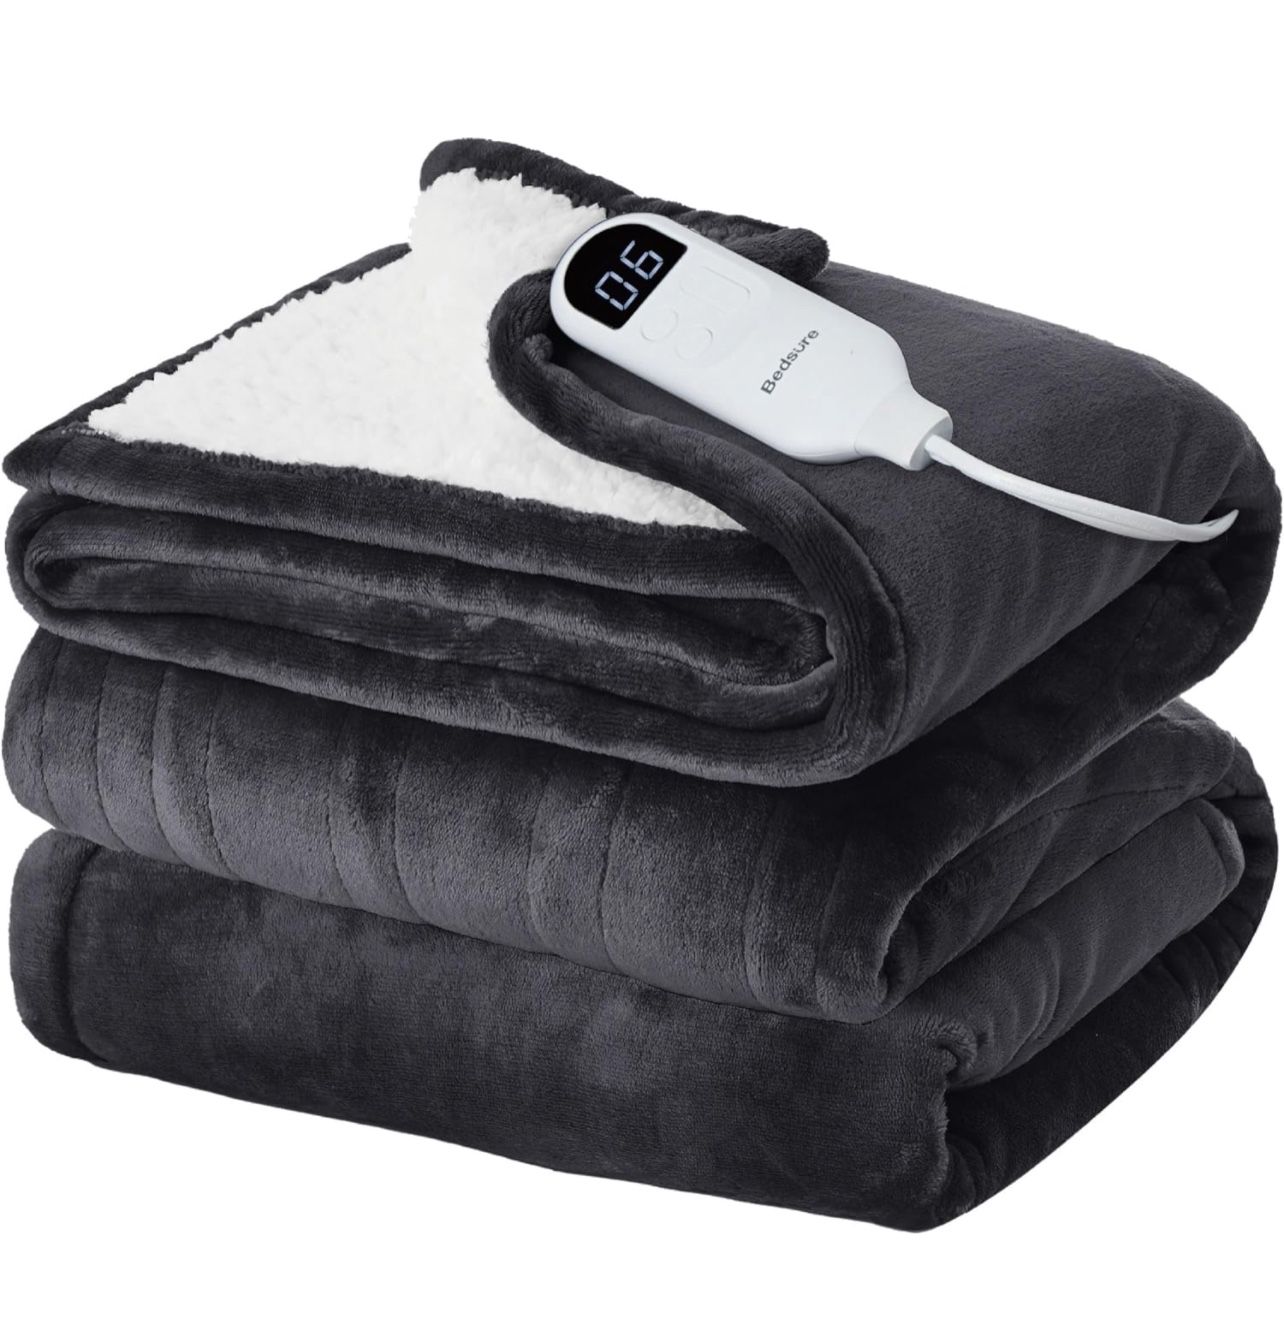 Bedsure Electric Blanket Full Size - Heated Blanket with 6 Heat Settings, Flannel Heating Blanket with 10 Time Settings, 8 hrs Timer Auto Shut Off (72